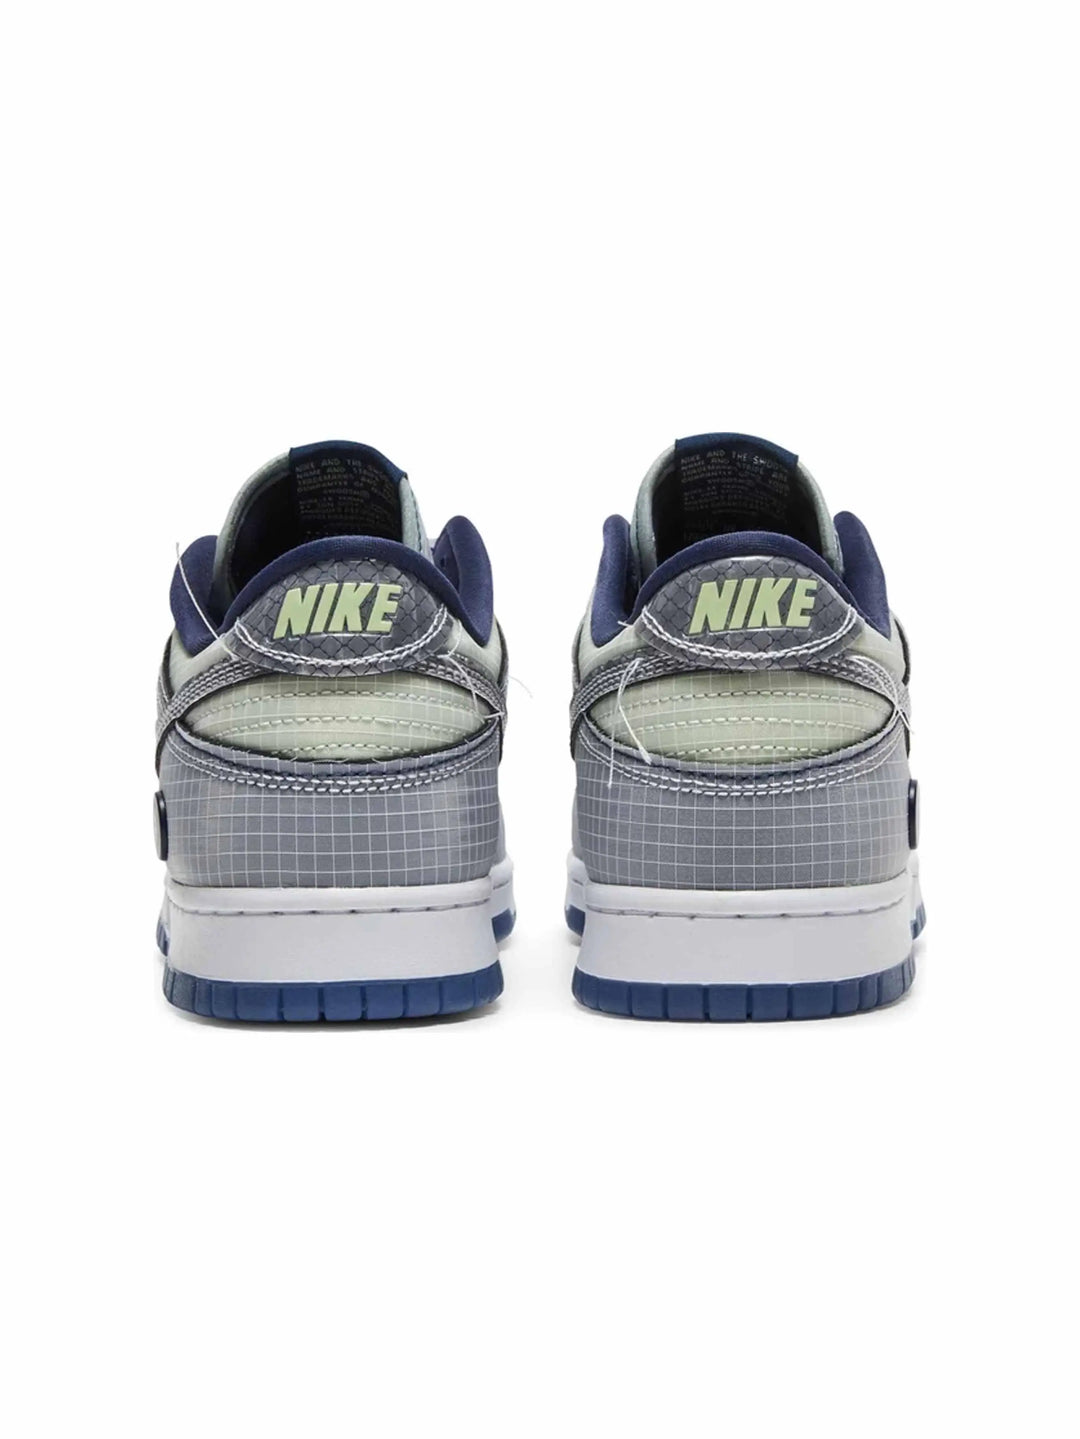 Nike Dunk Low Union Passport Pack Pistachio in Auckland, New Zealand - Shop name